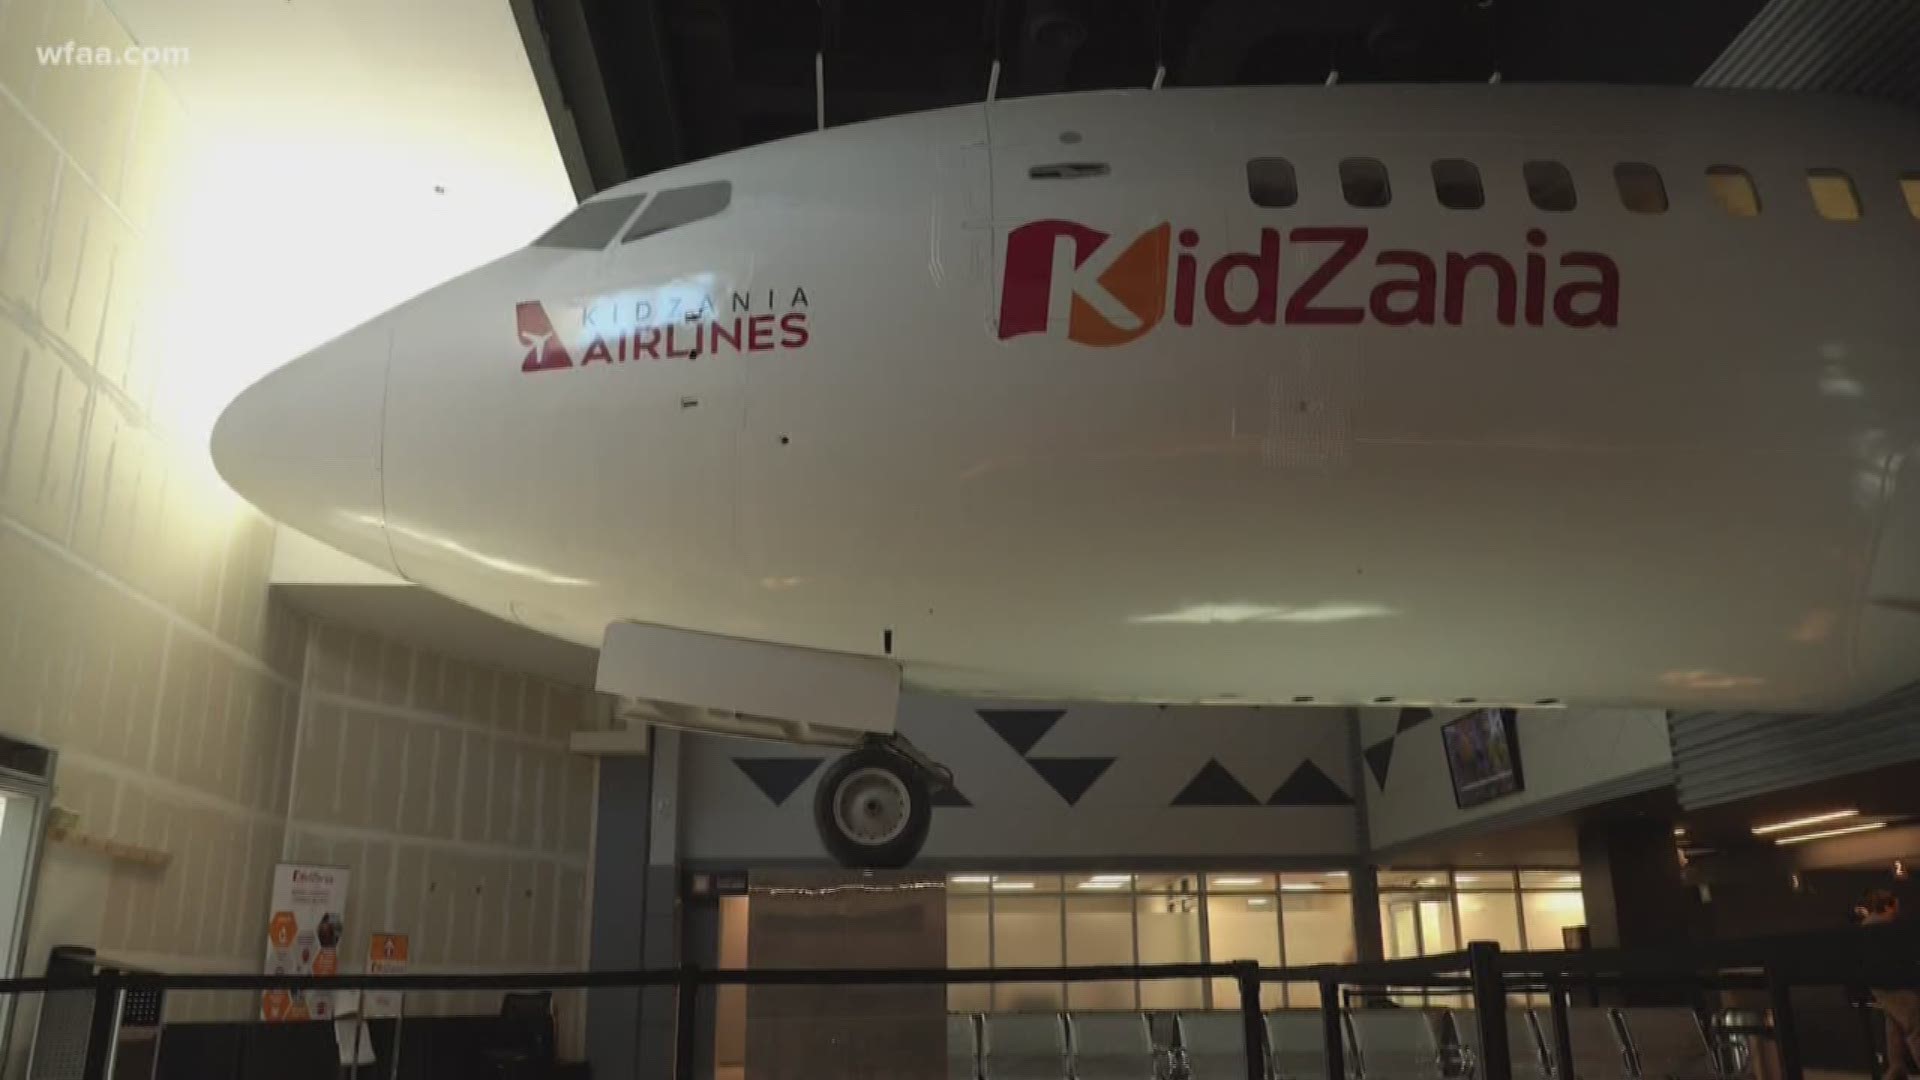 On Saturday, KidZania is opening at Stonebriar Centre in Frisco. It is designed to show children how the world works.